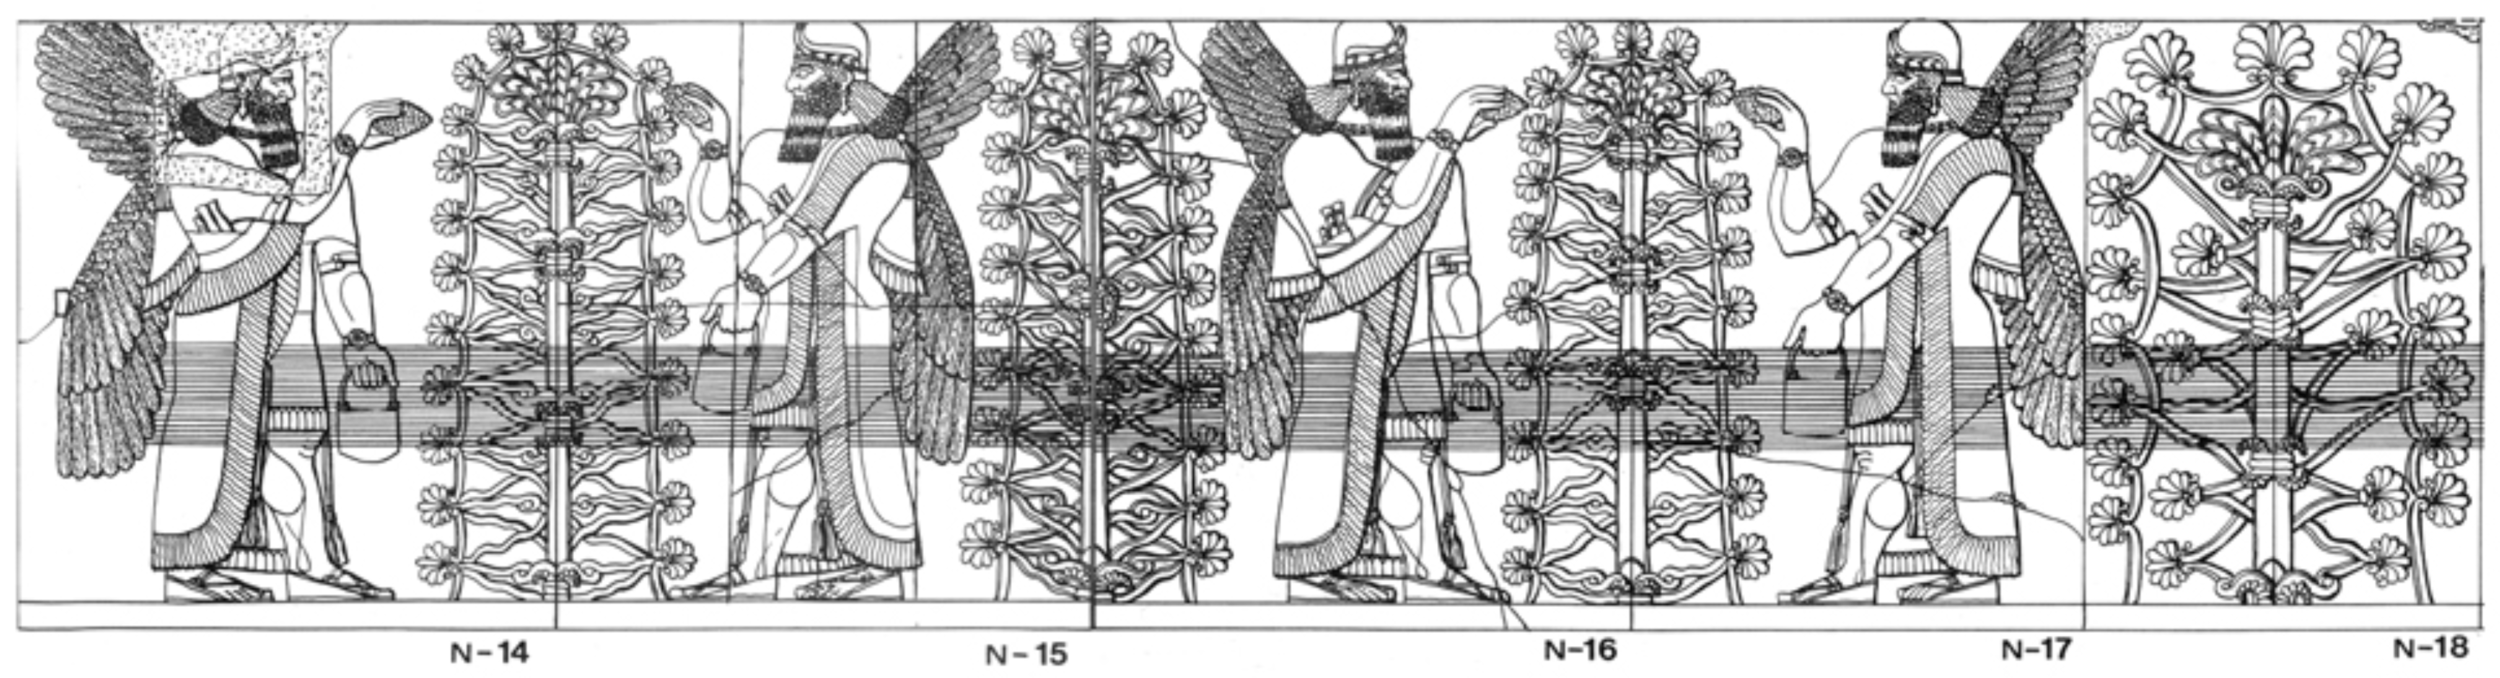  Drawings of Northwest Palace panels by archaeologist A. H. Layard and other artists from Nimrud 